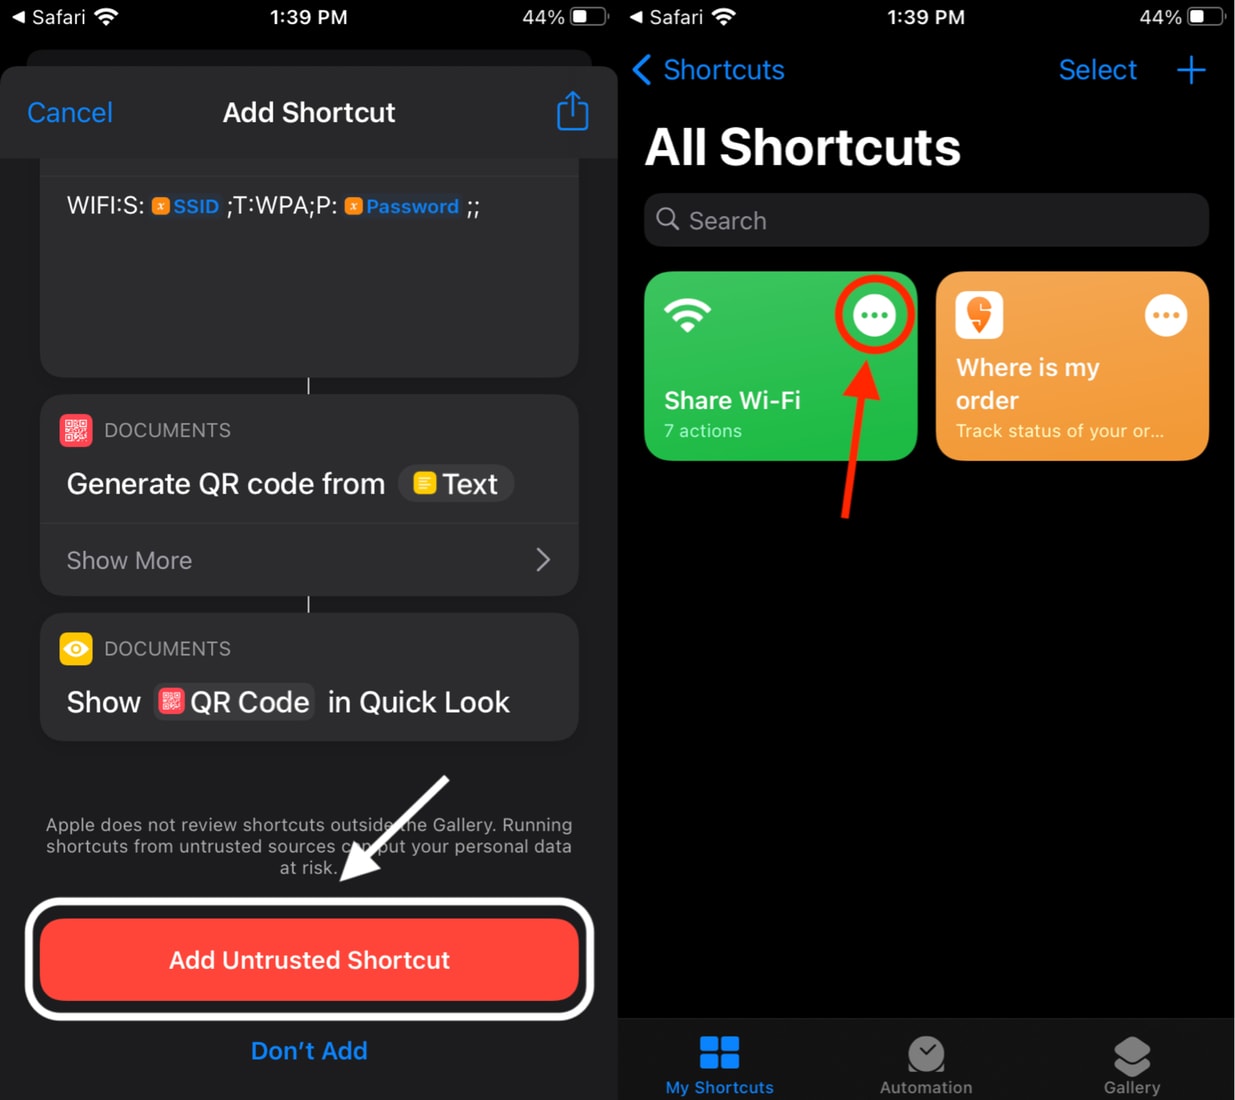 Add Untrusted Shortcut and Edit the Shortcut